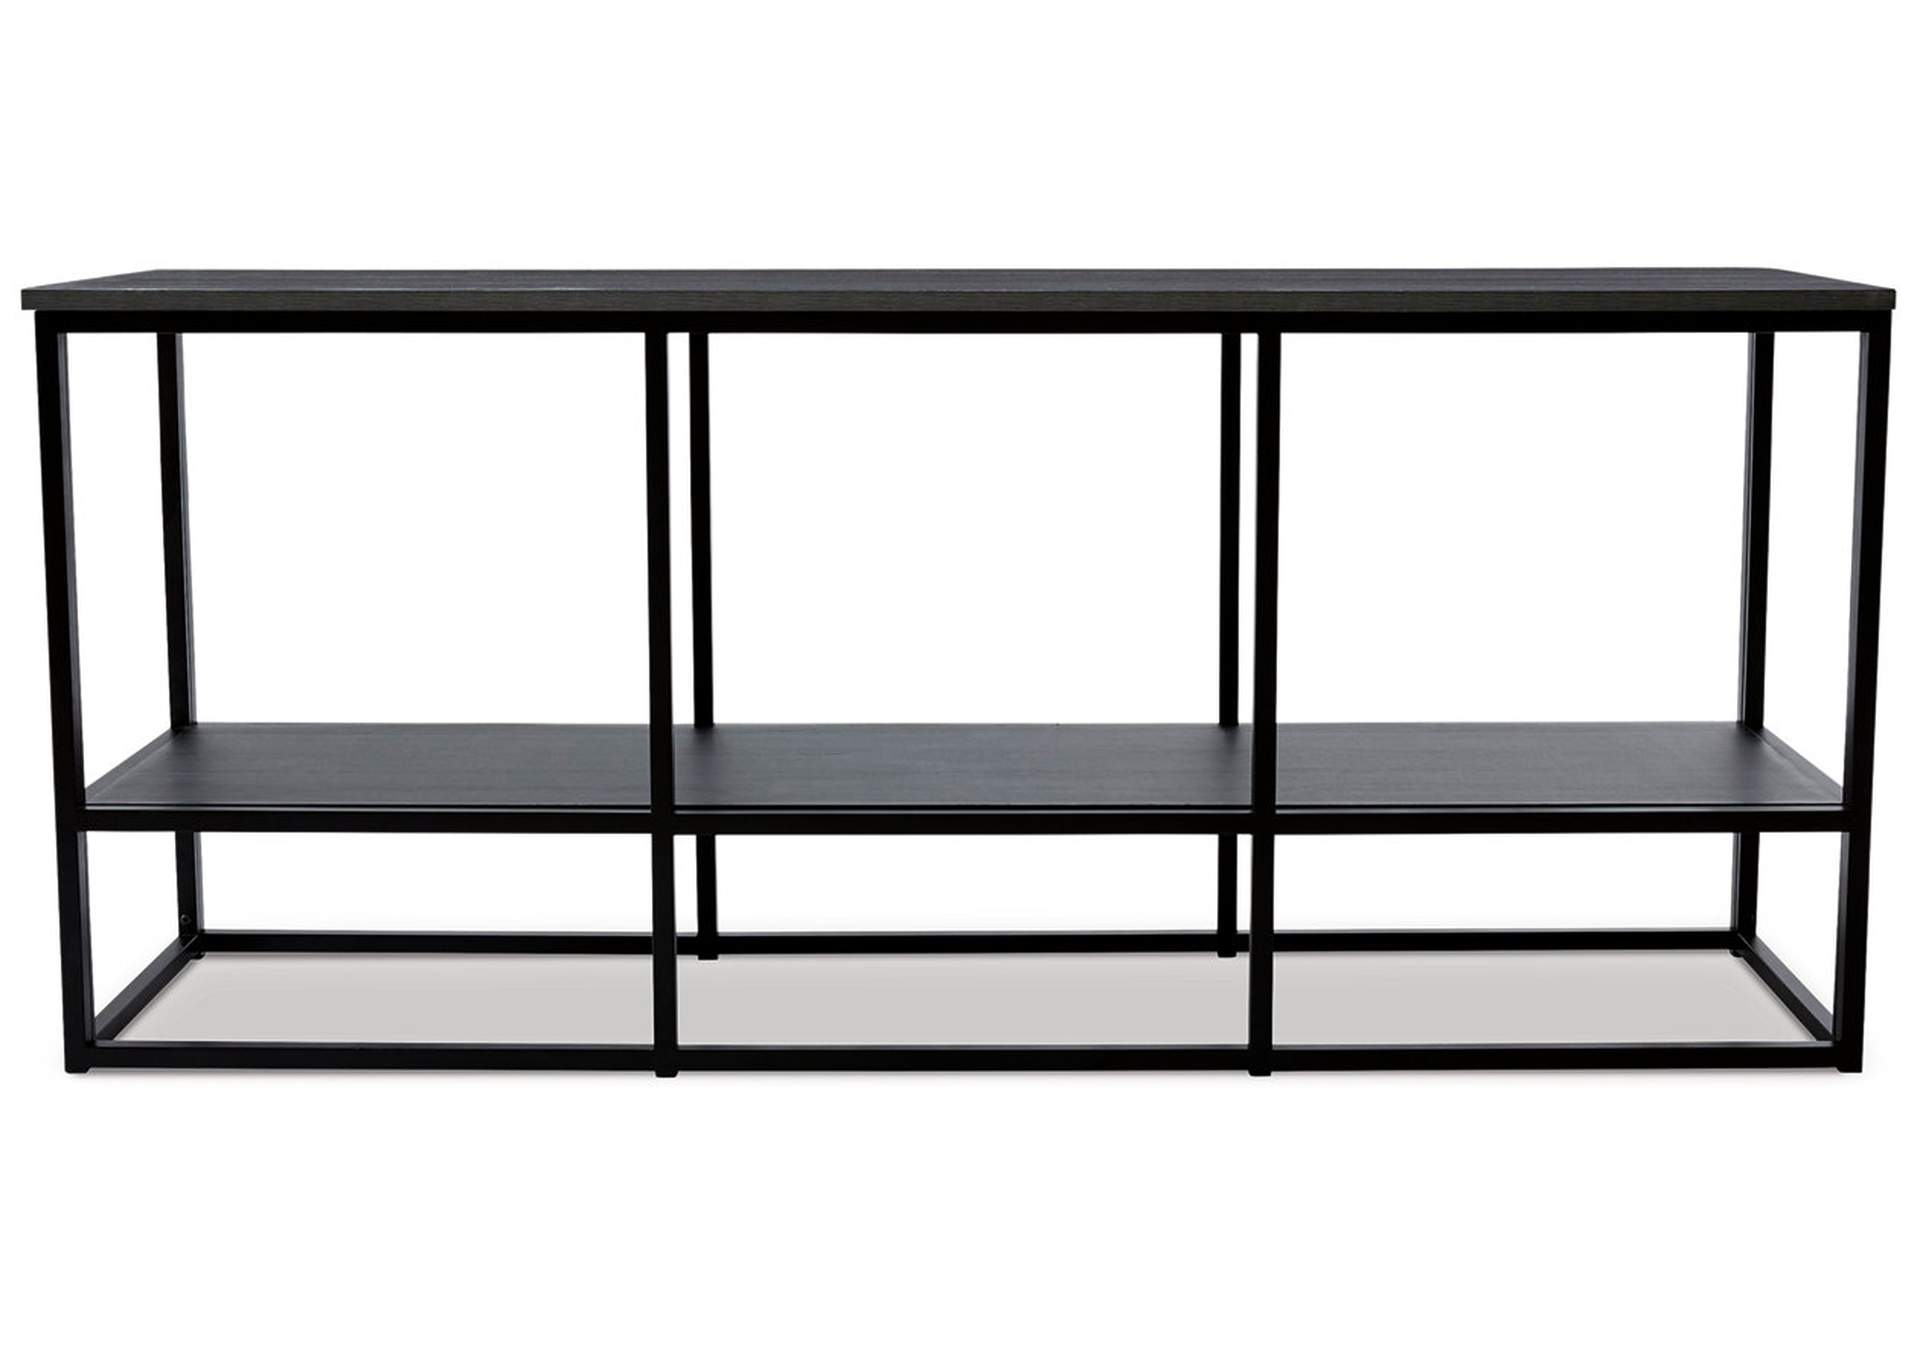 Yarlow 65" TV Stand,Direct To Consumer Express